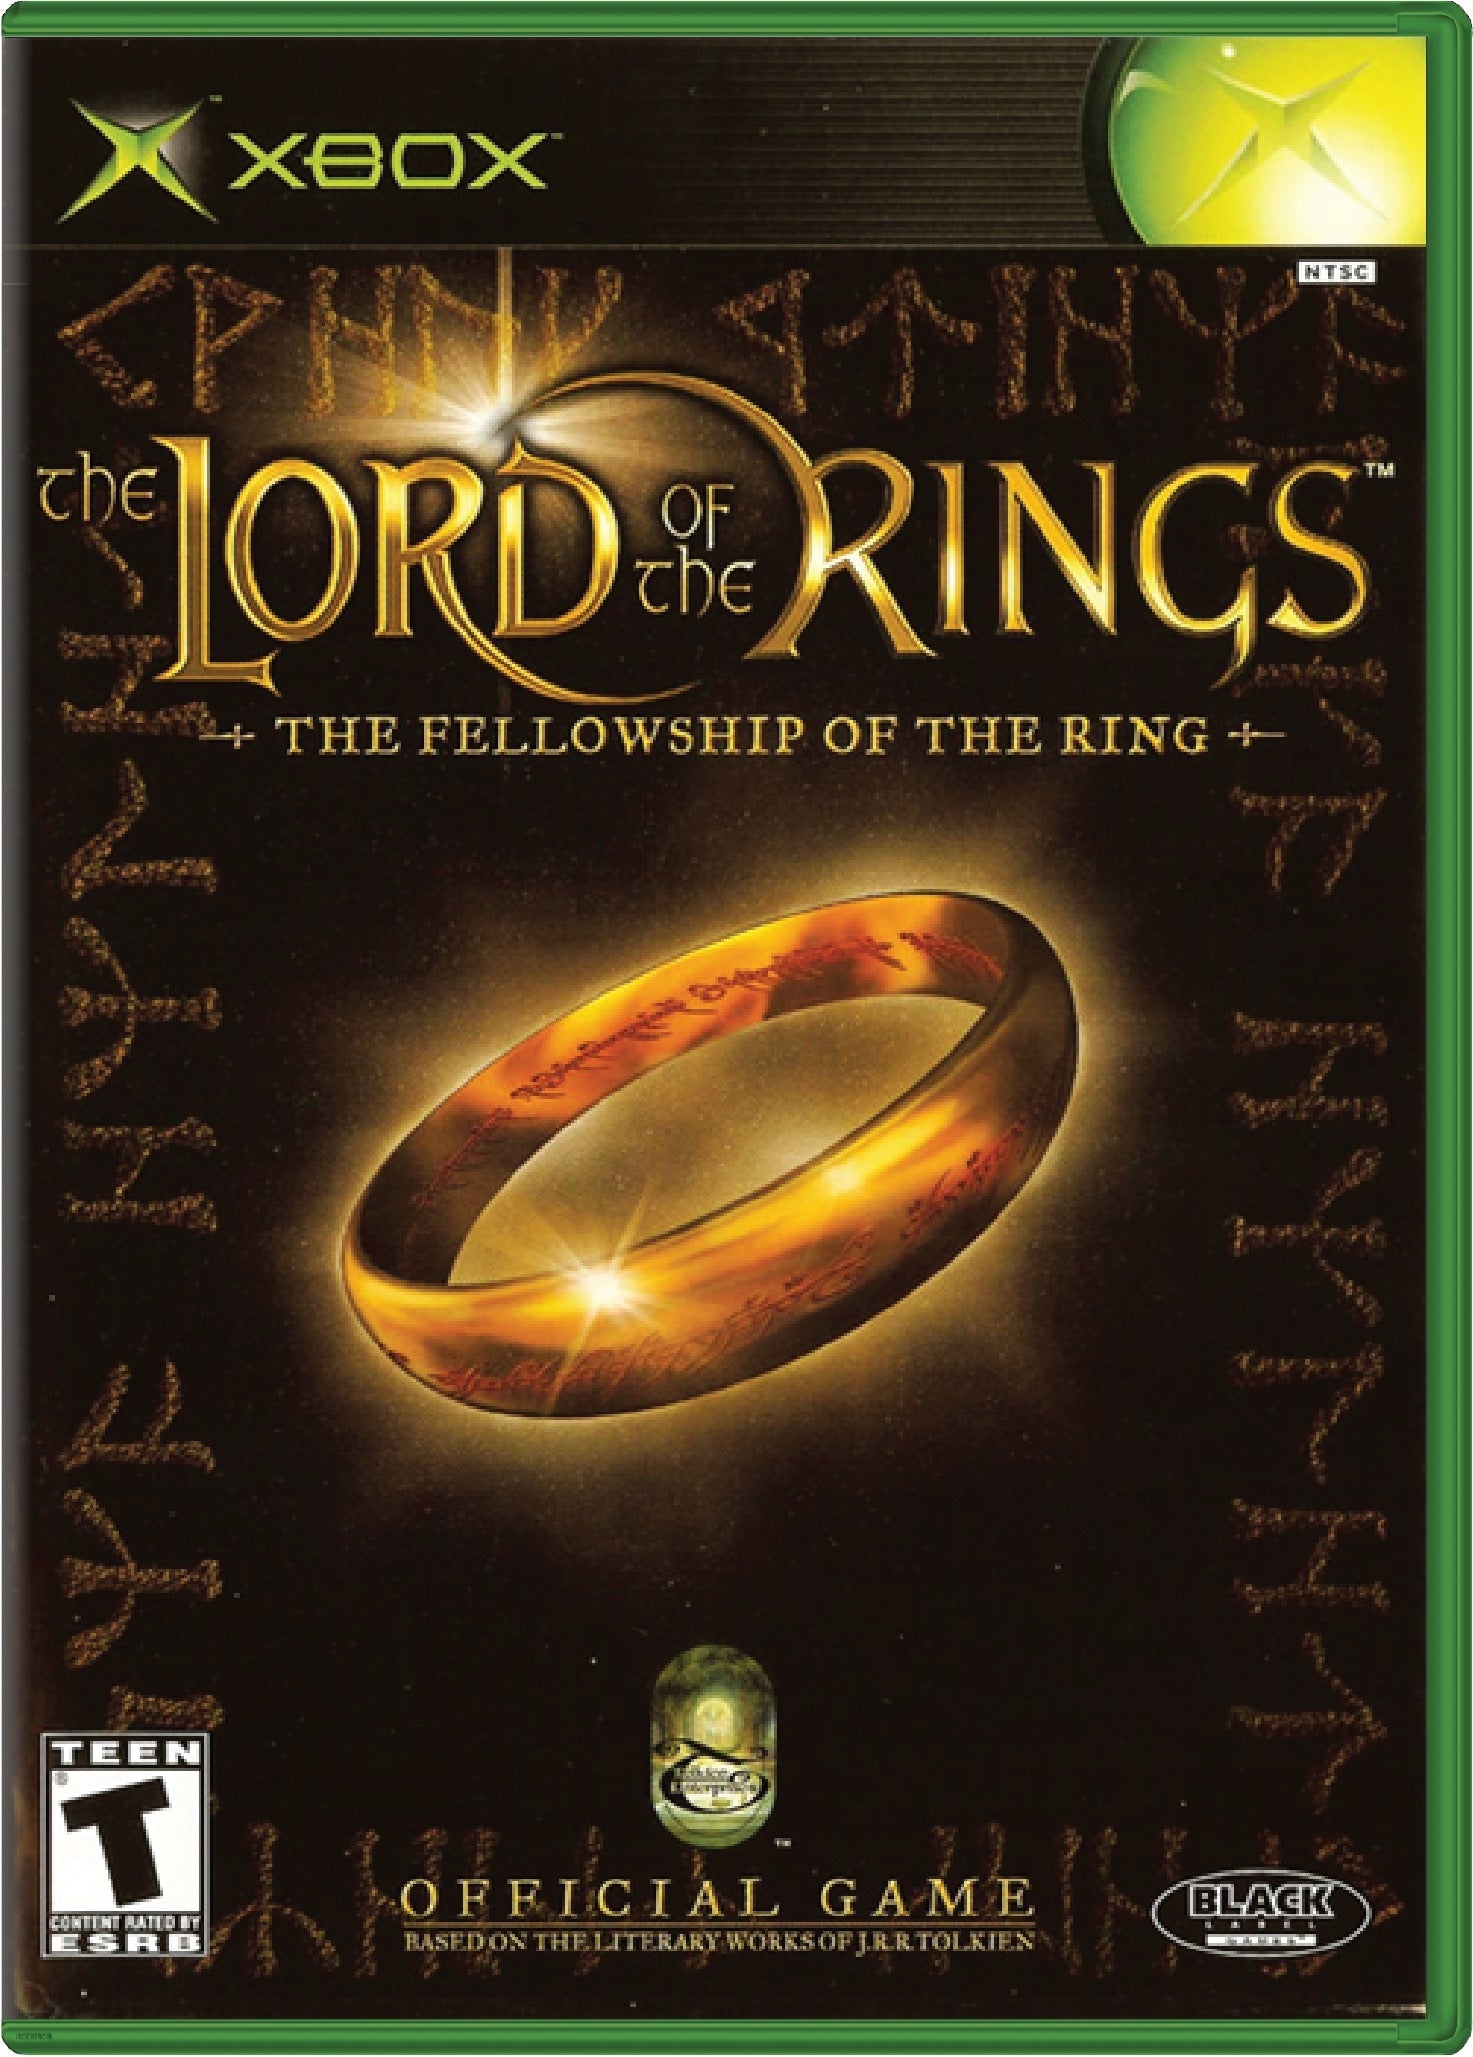 The Lord of the Rings Fellowship of the Ring Cover Art